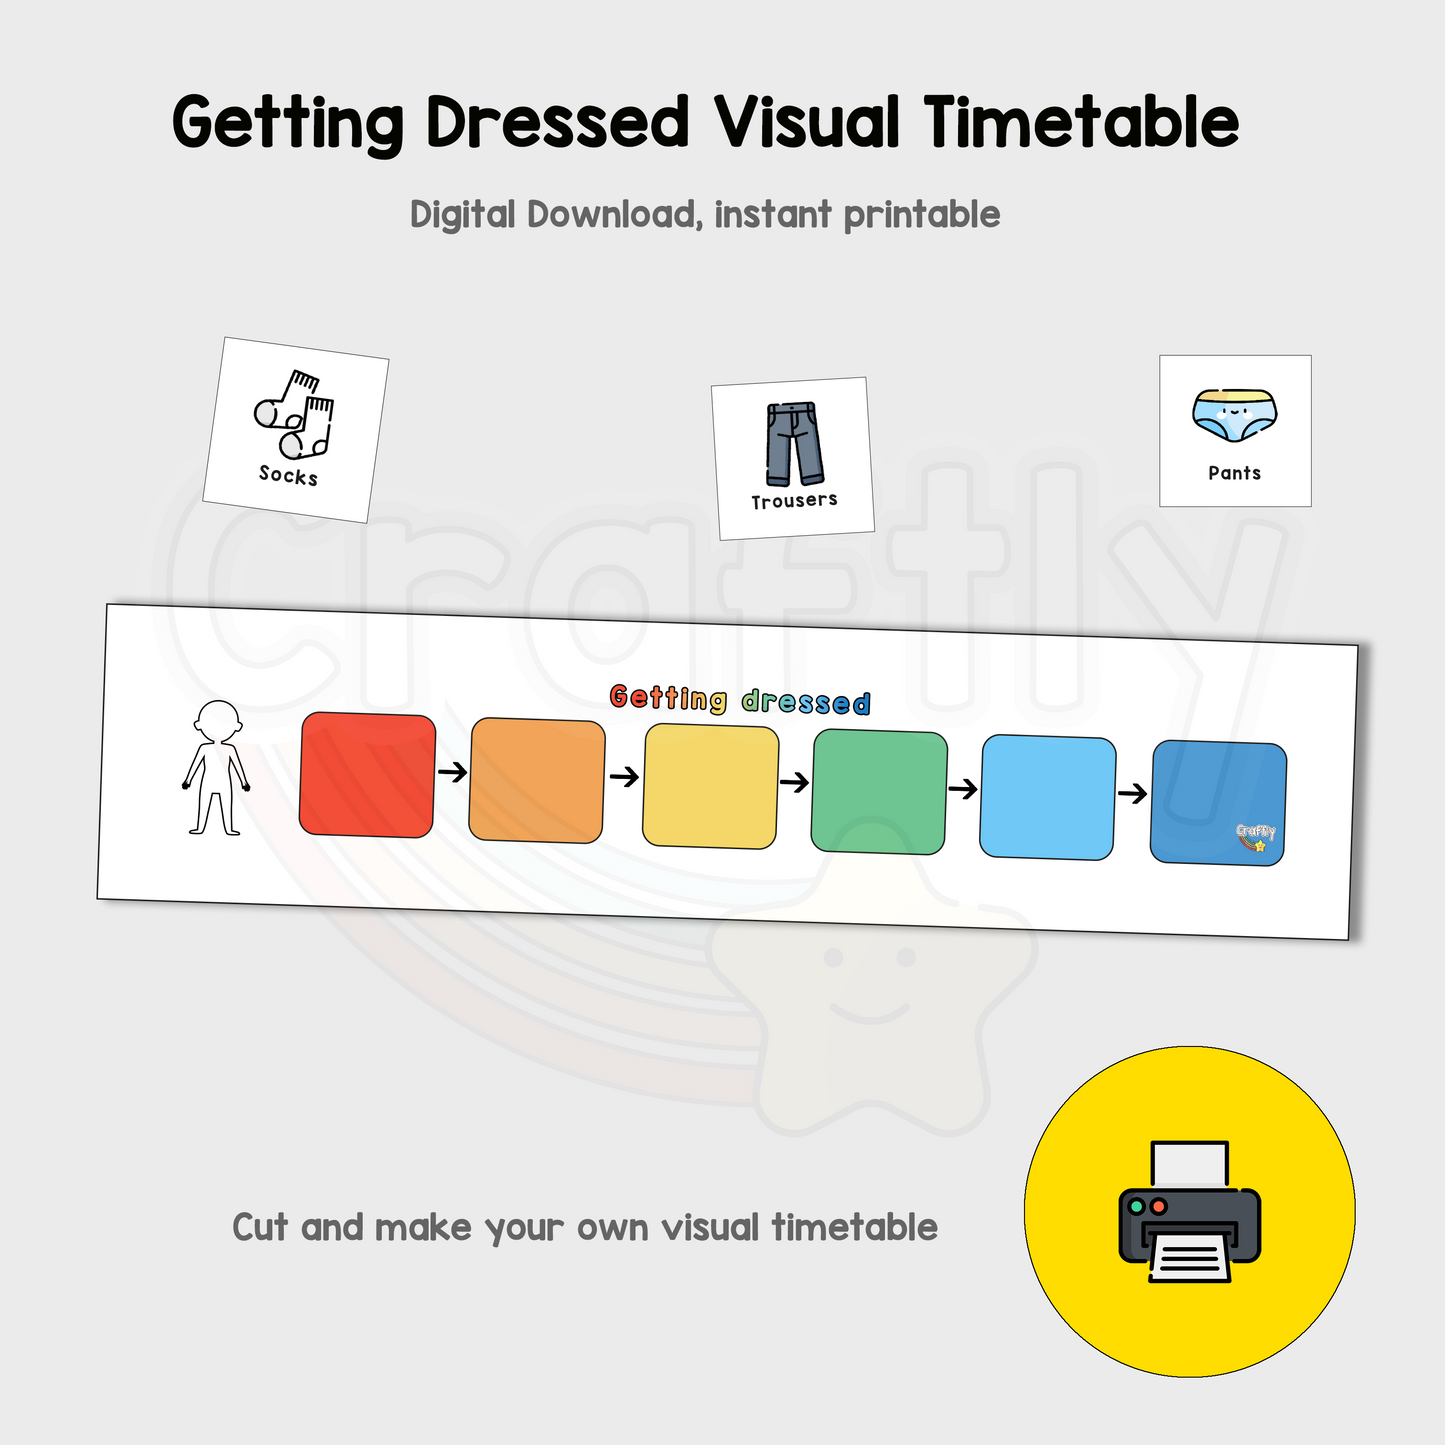 Getting Dressed Visual Timetable